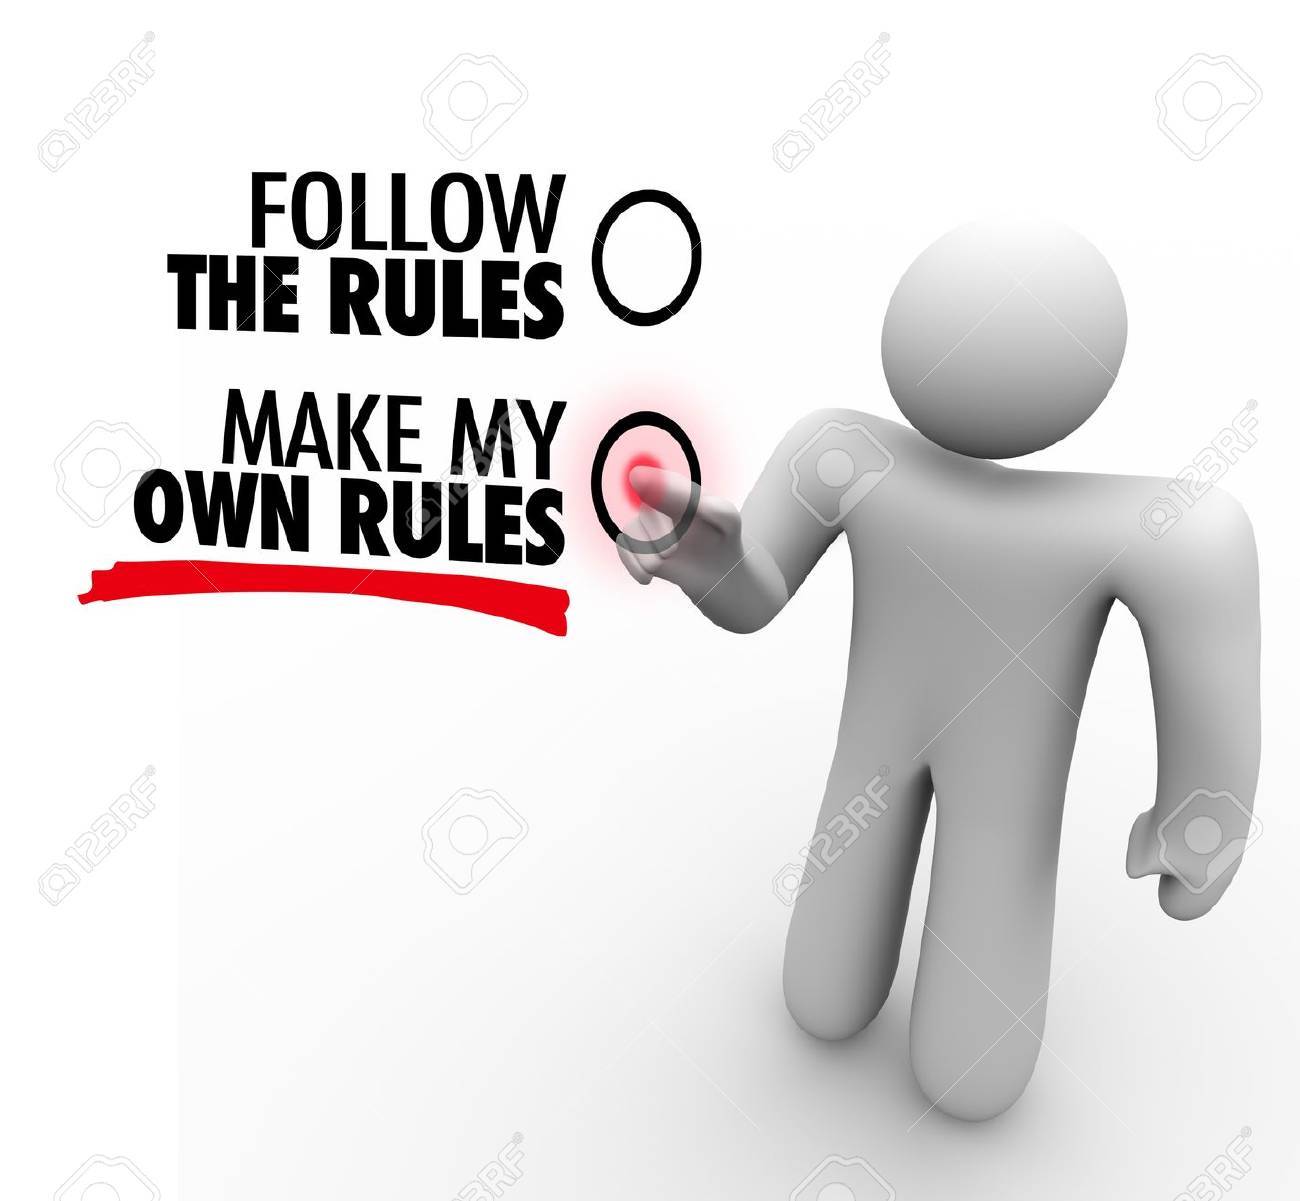 20622181-the-words-follow-the-rules-and-make-my-own-rules-on-a-touch-screen-and-a-person-choos...jpg